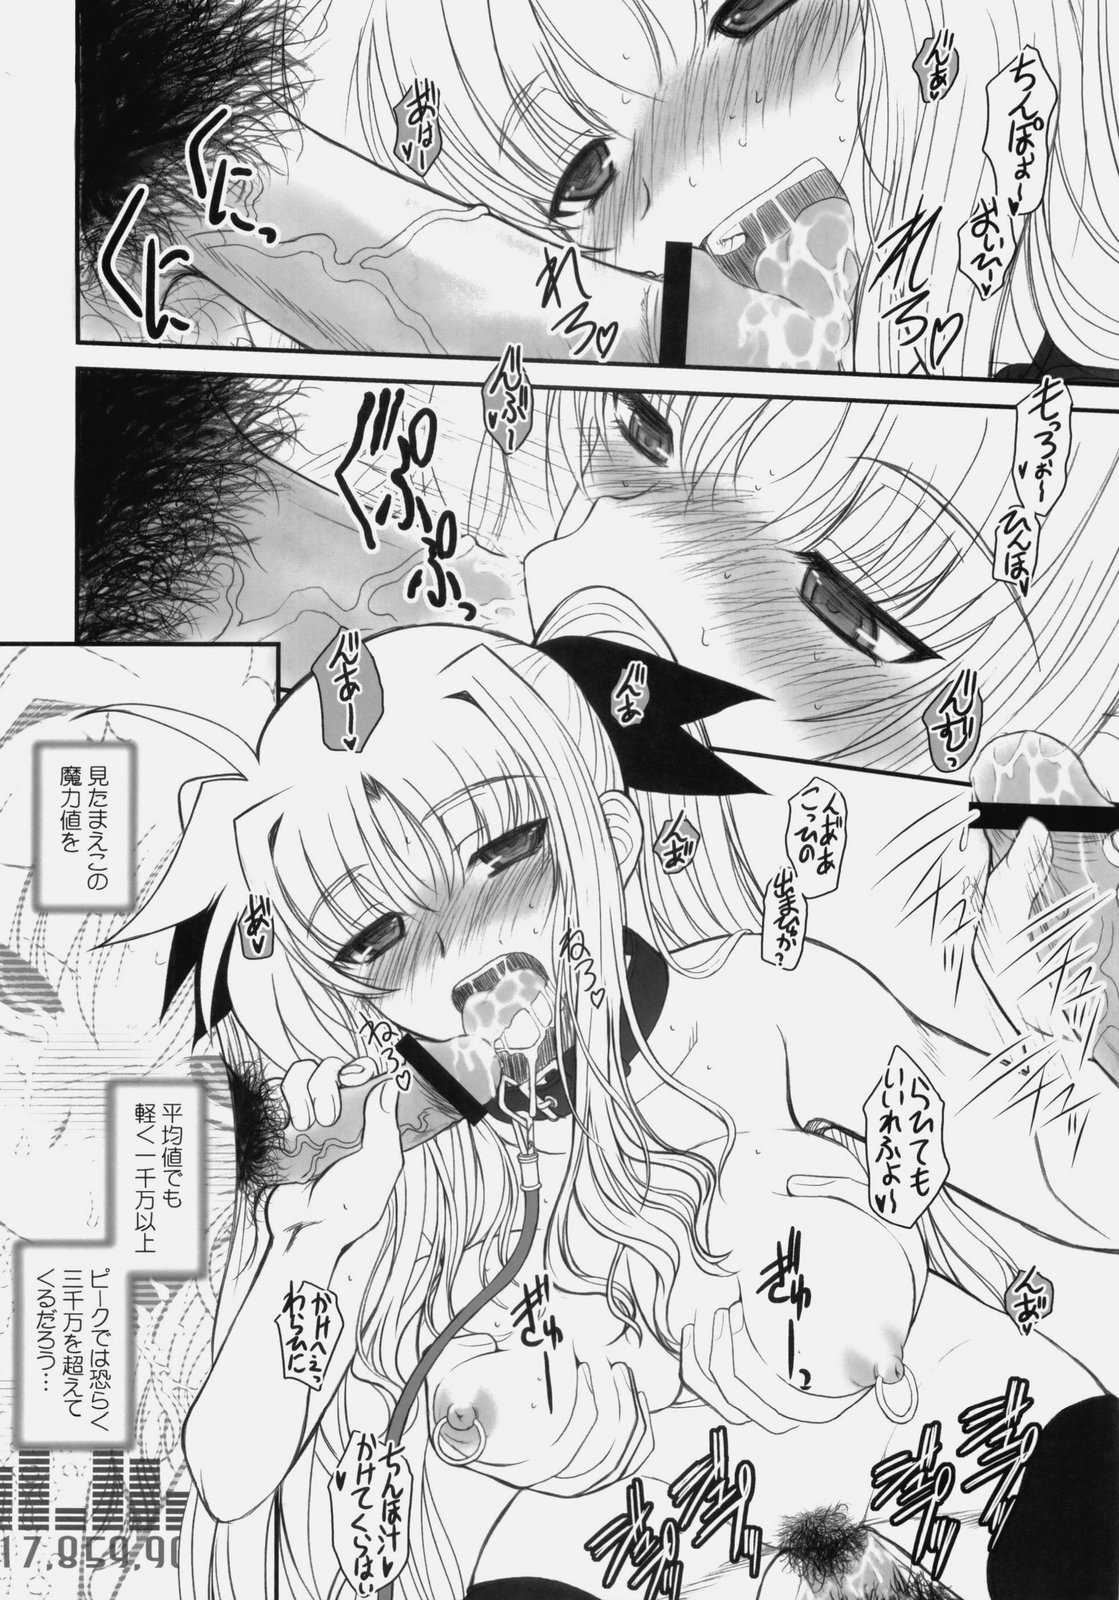 (C76) [DIEPPE FACTORY Darkside] FATE FIRE WITH FIRE 3 (Mahou Shoujo Lyrical Nanoha) (C76) (同人誌) [DIEPPE FACTORY Darkside] FATE FIRE WITH FIRE 3 (魔法少女リリカルなのは)